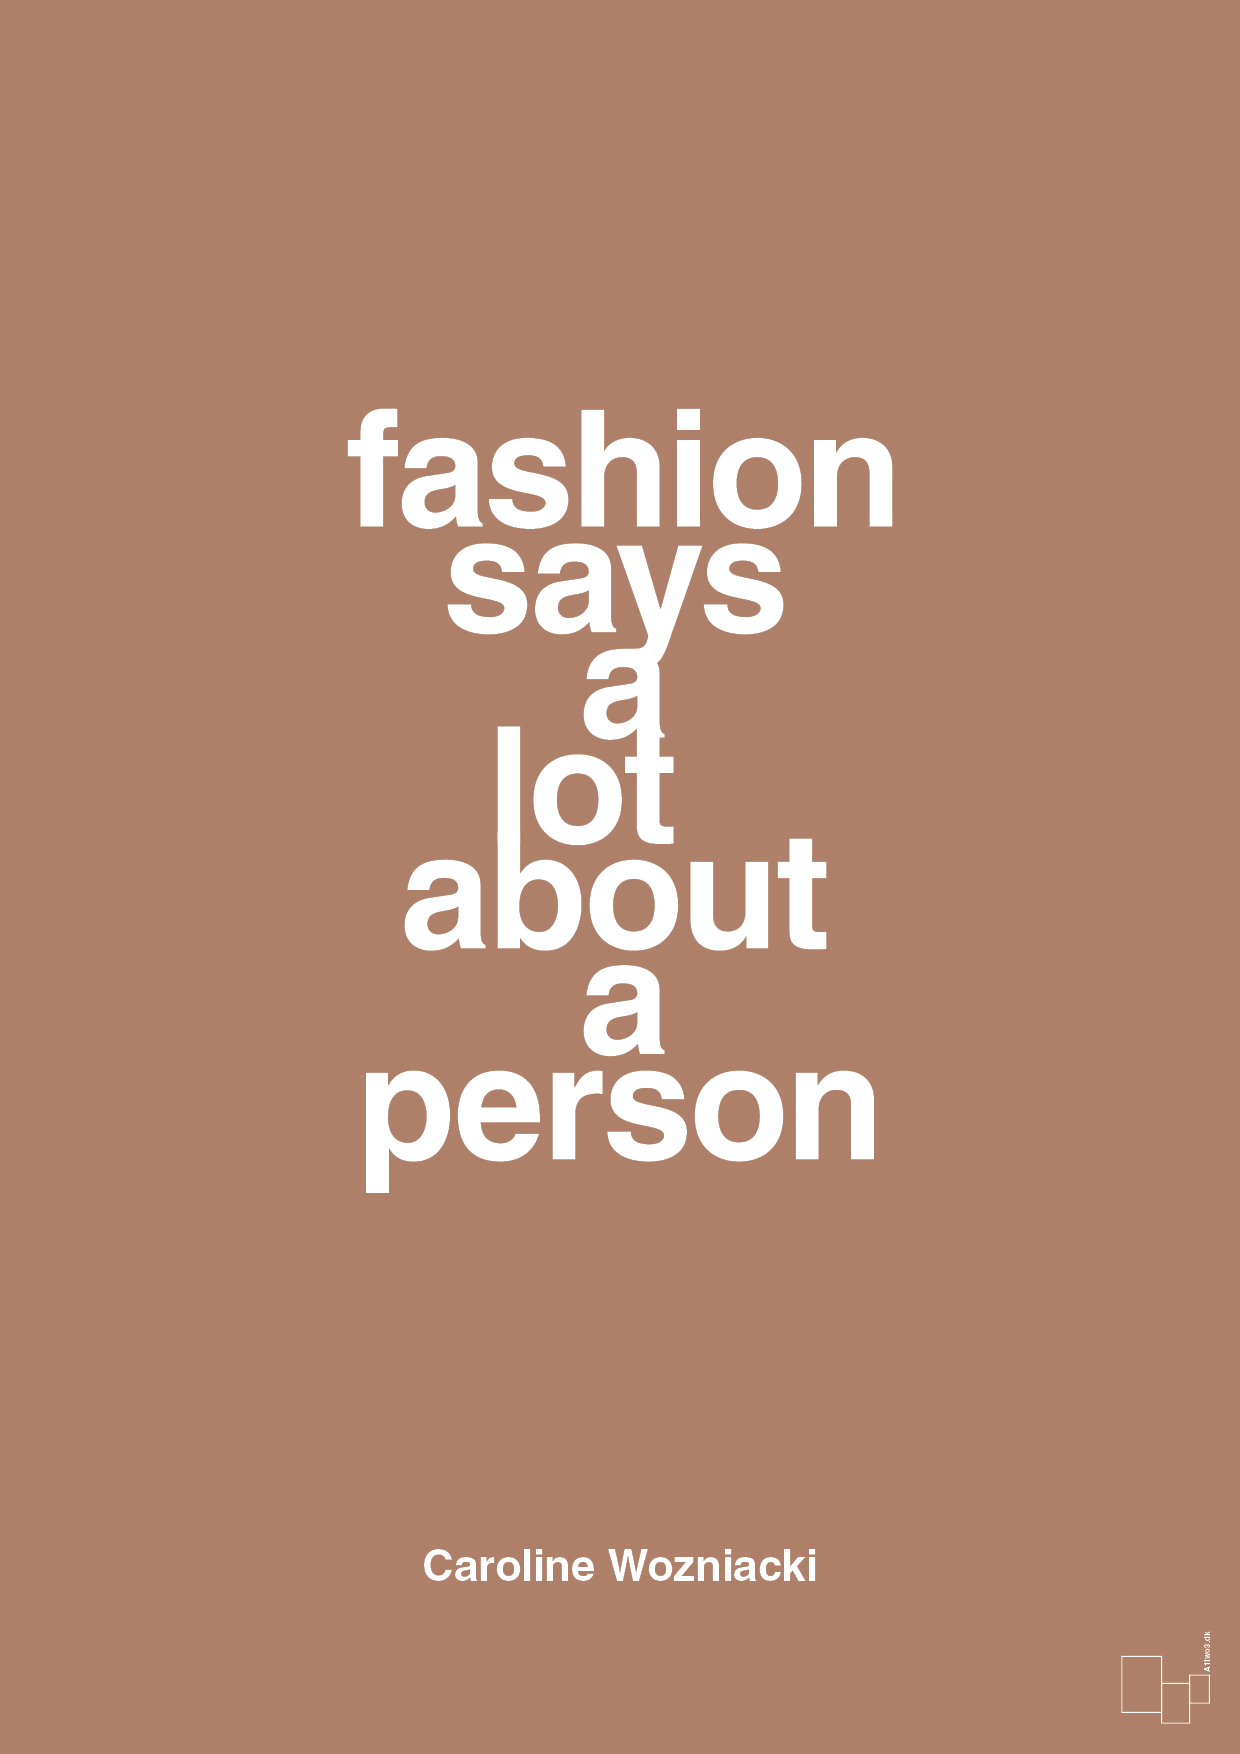 fashion says a lot about a person - Plakat med Citater i Cider Spice